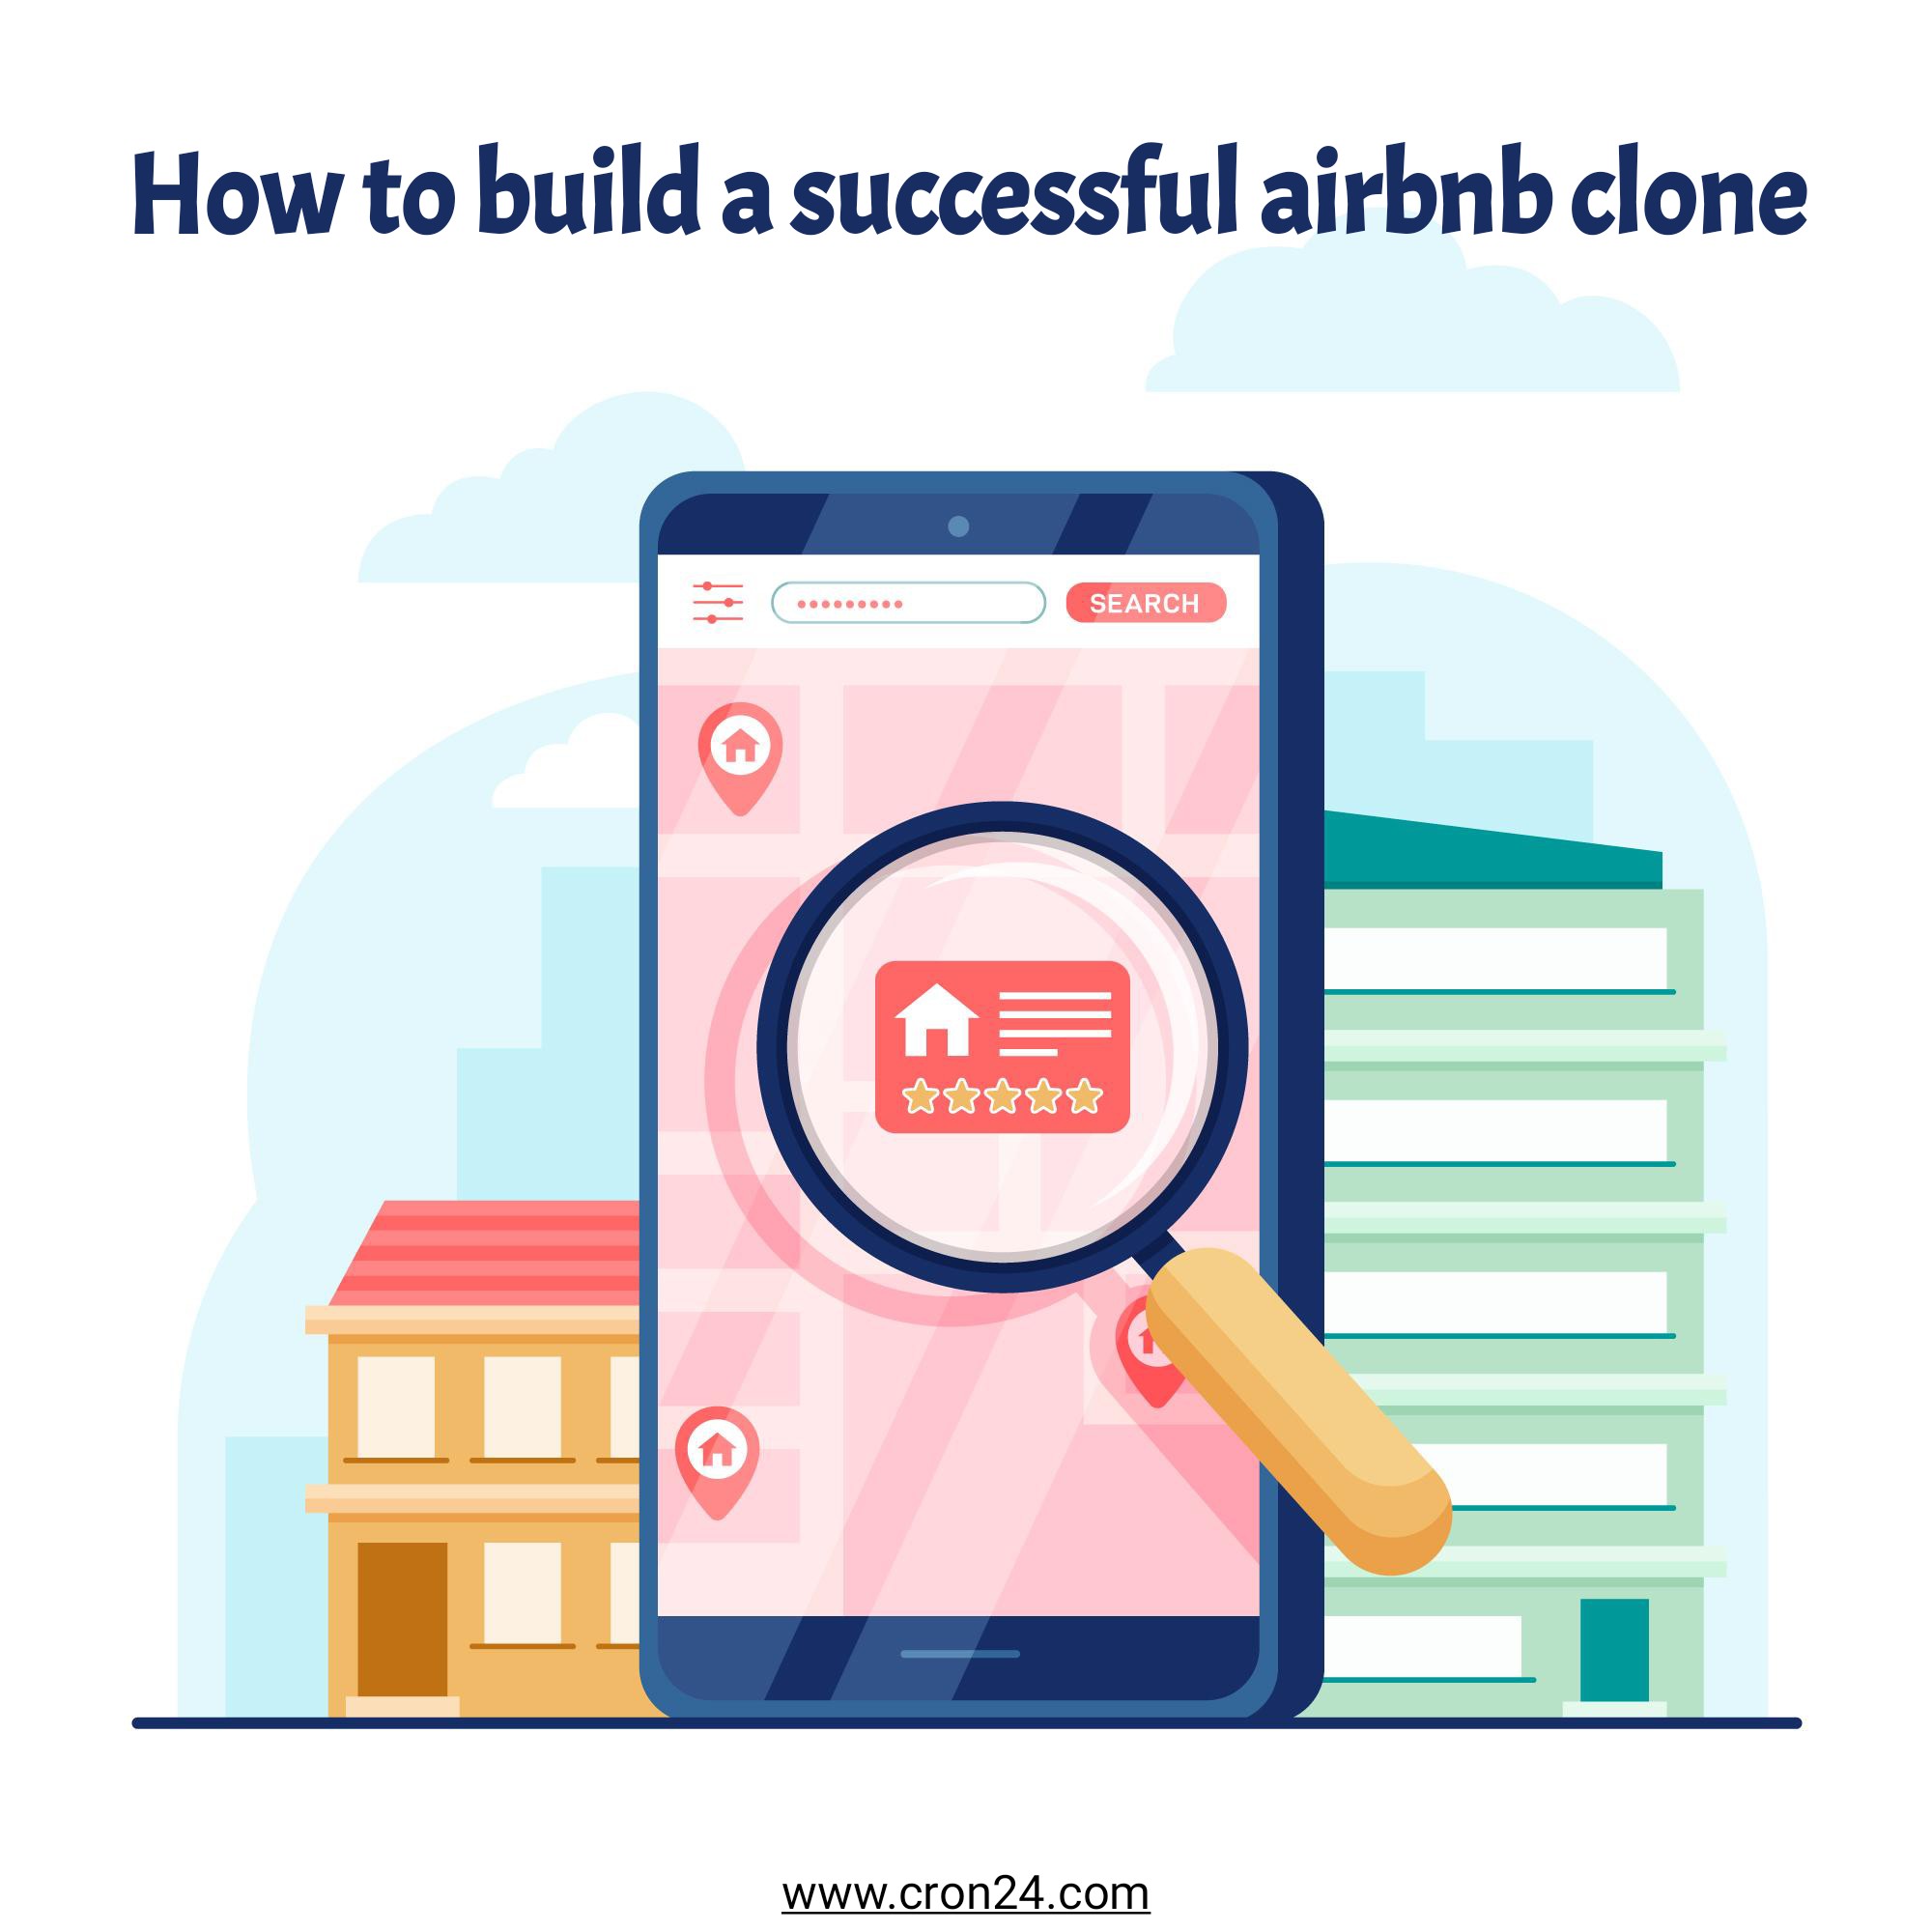 How to build a successful airbnb clone - Cron24 technologies